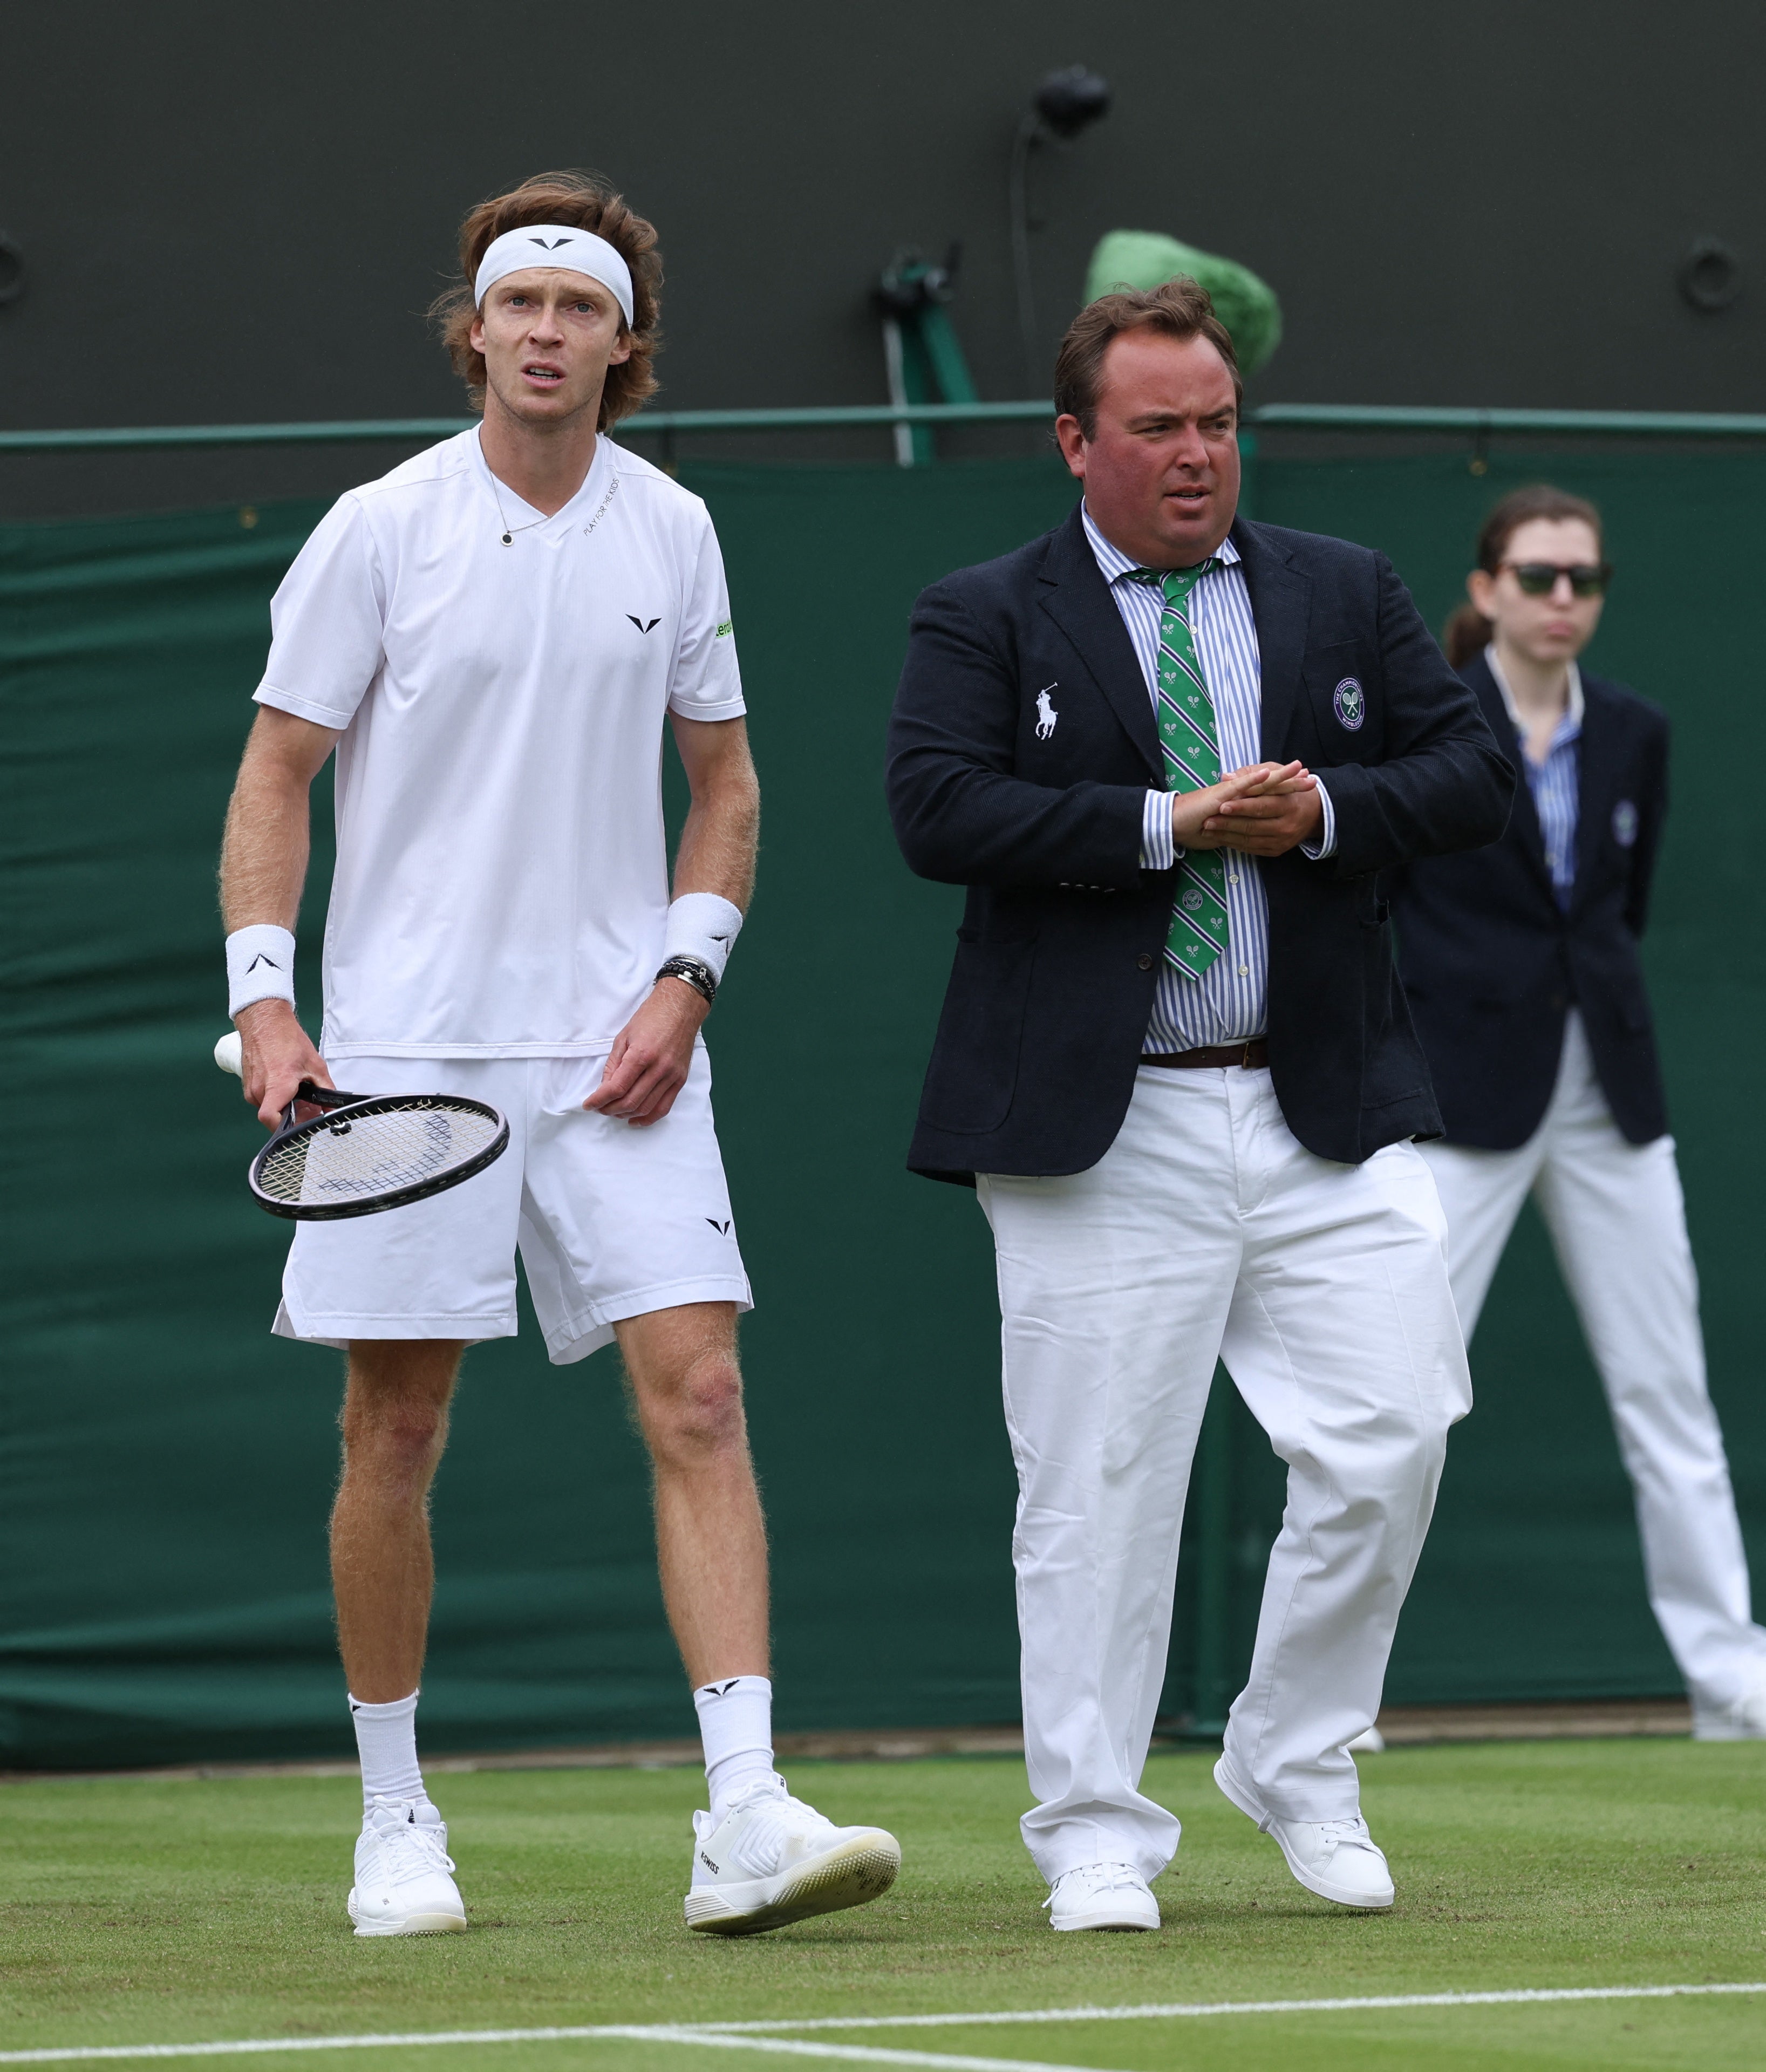 Russia's Andrey Rublev inspects the grass with umpire during his first round